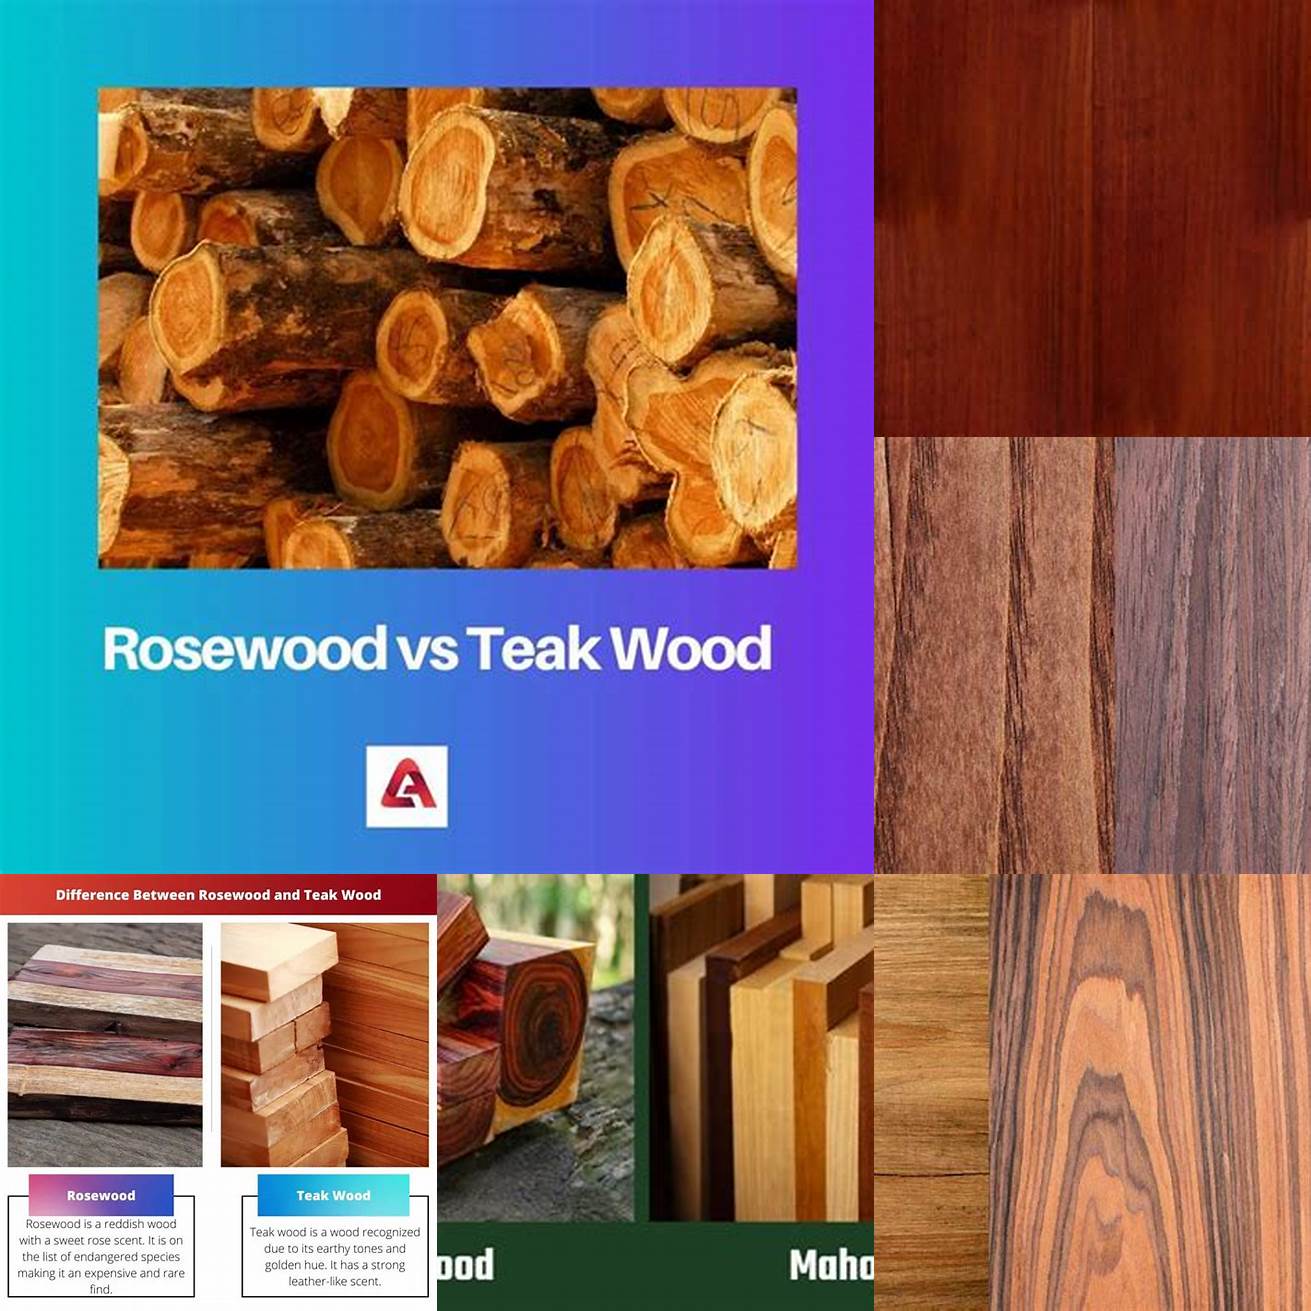 Comparison of Rosewood and Teak Wood